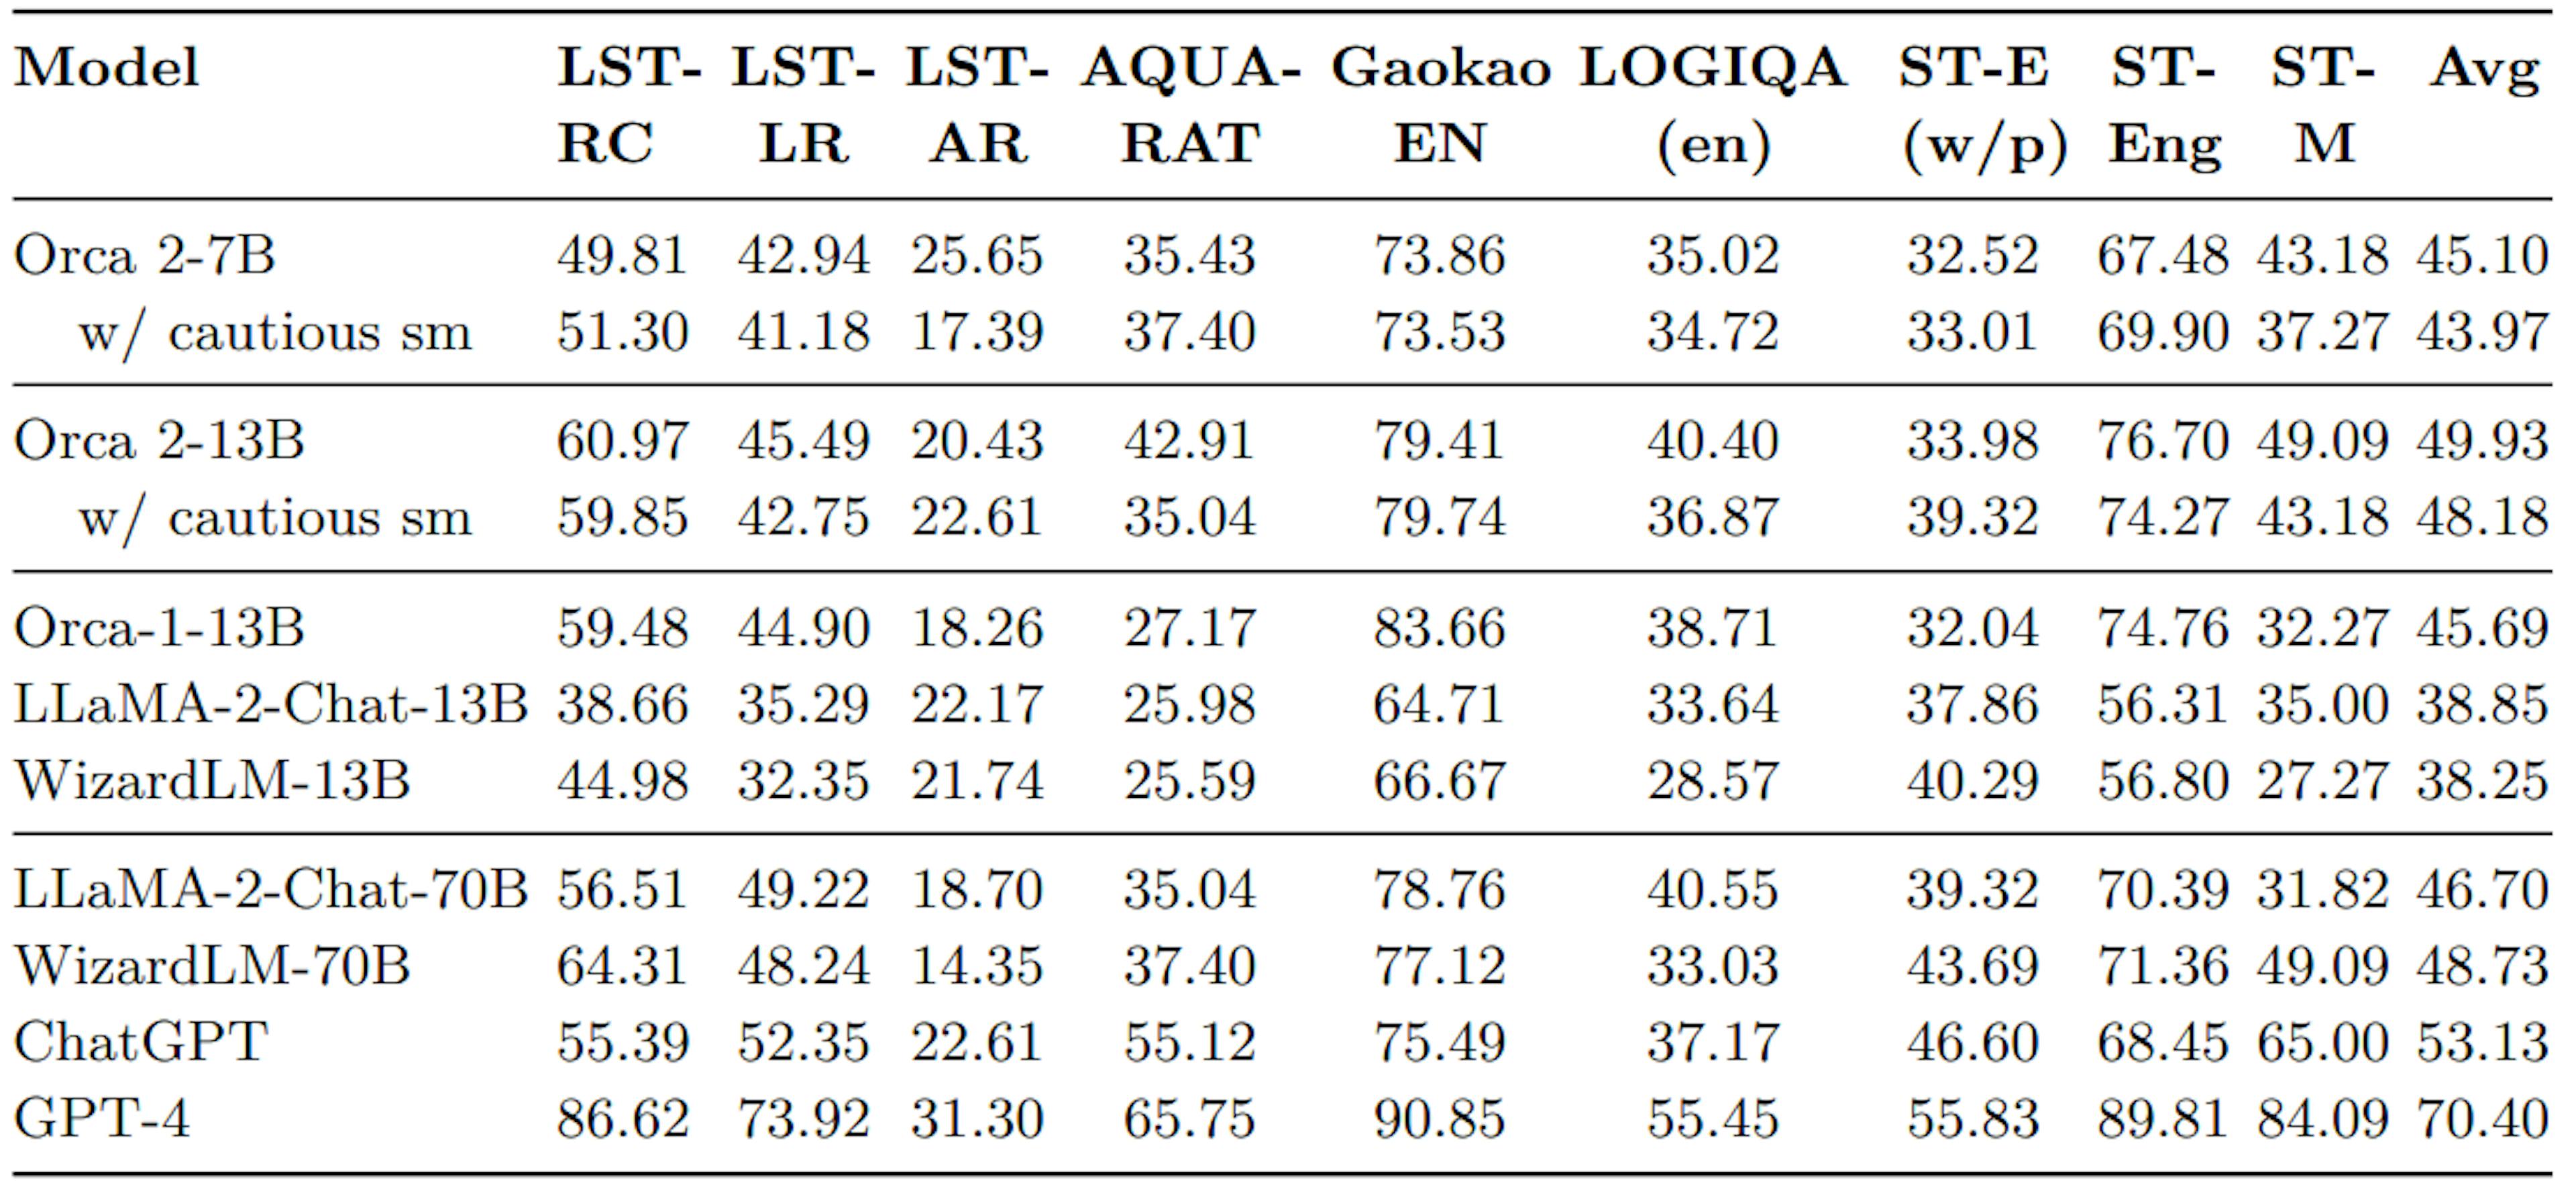 Table 6: Zero-Shot performance of Orca 2 models compared to other baselines on AGIEval benchmark tasks.